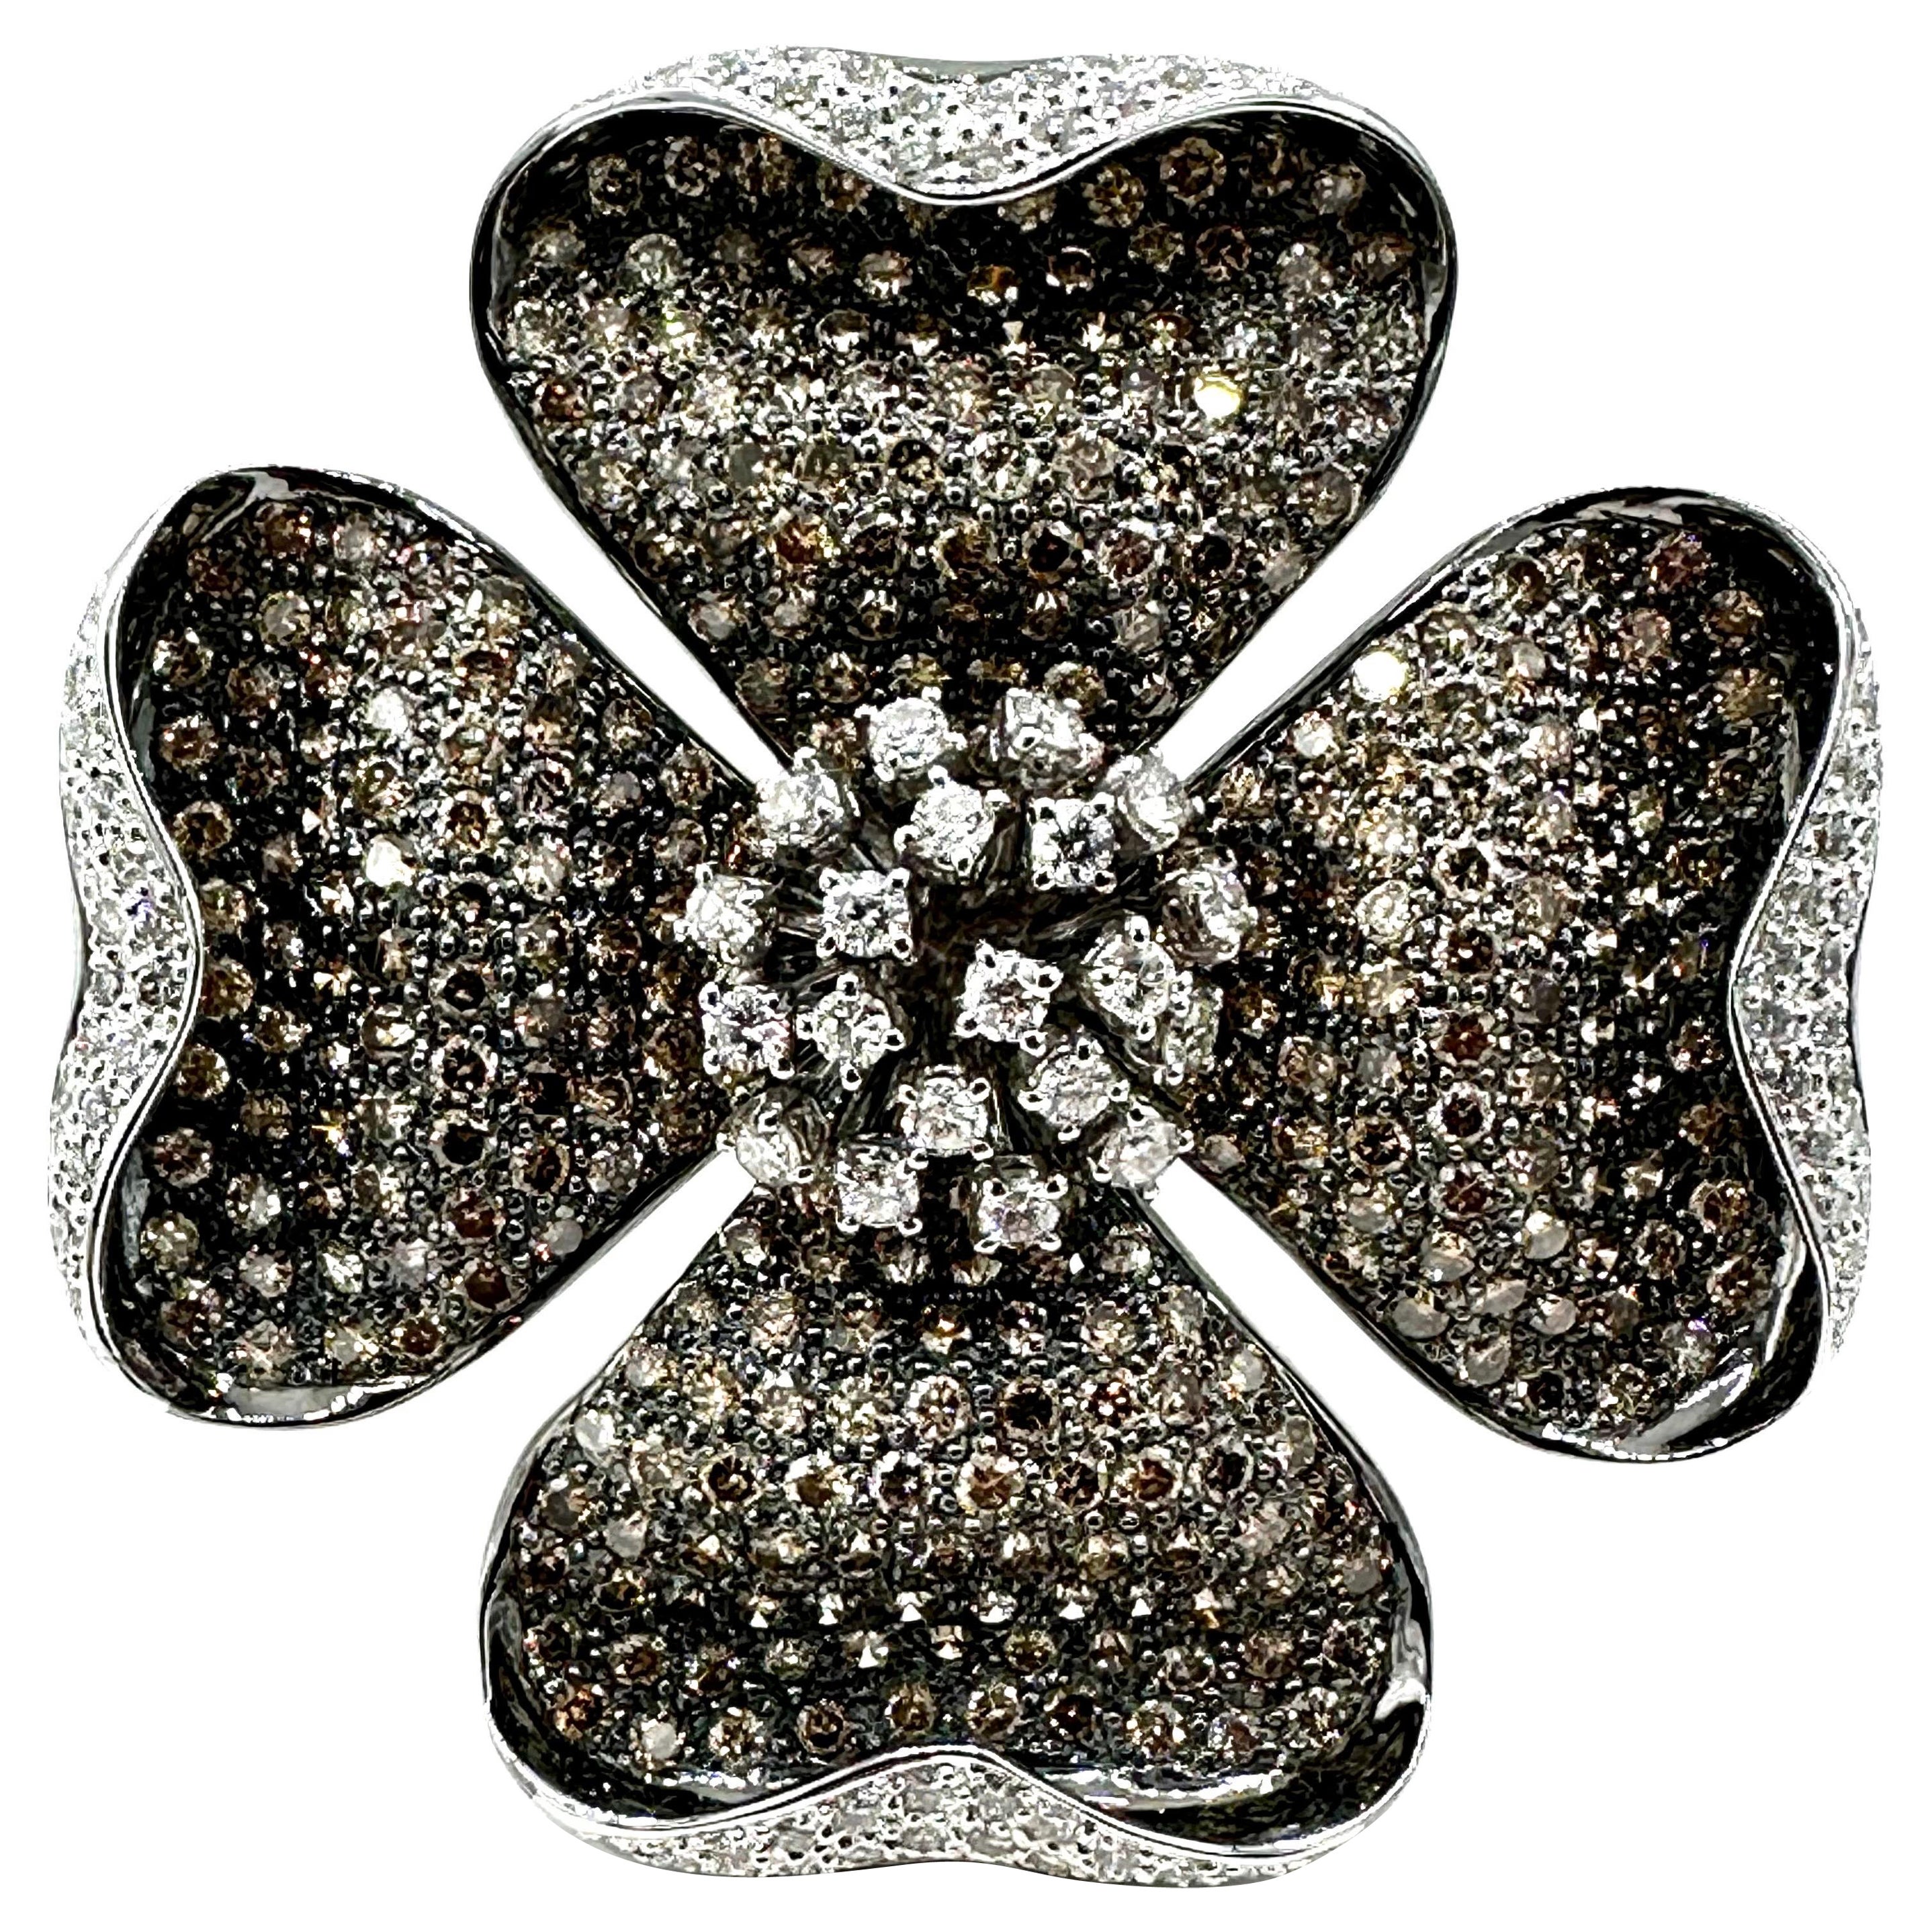 10.72 Carats Round Brilliant Cognac and White Diamonds White Gold Dogwood Brooch